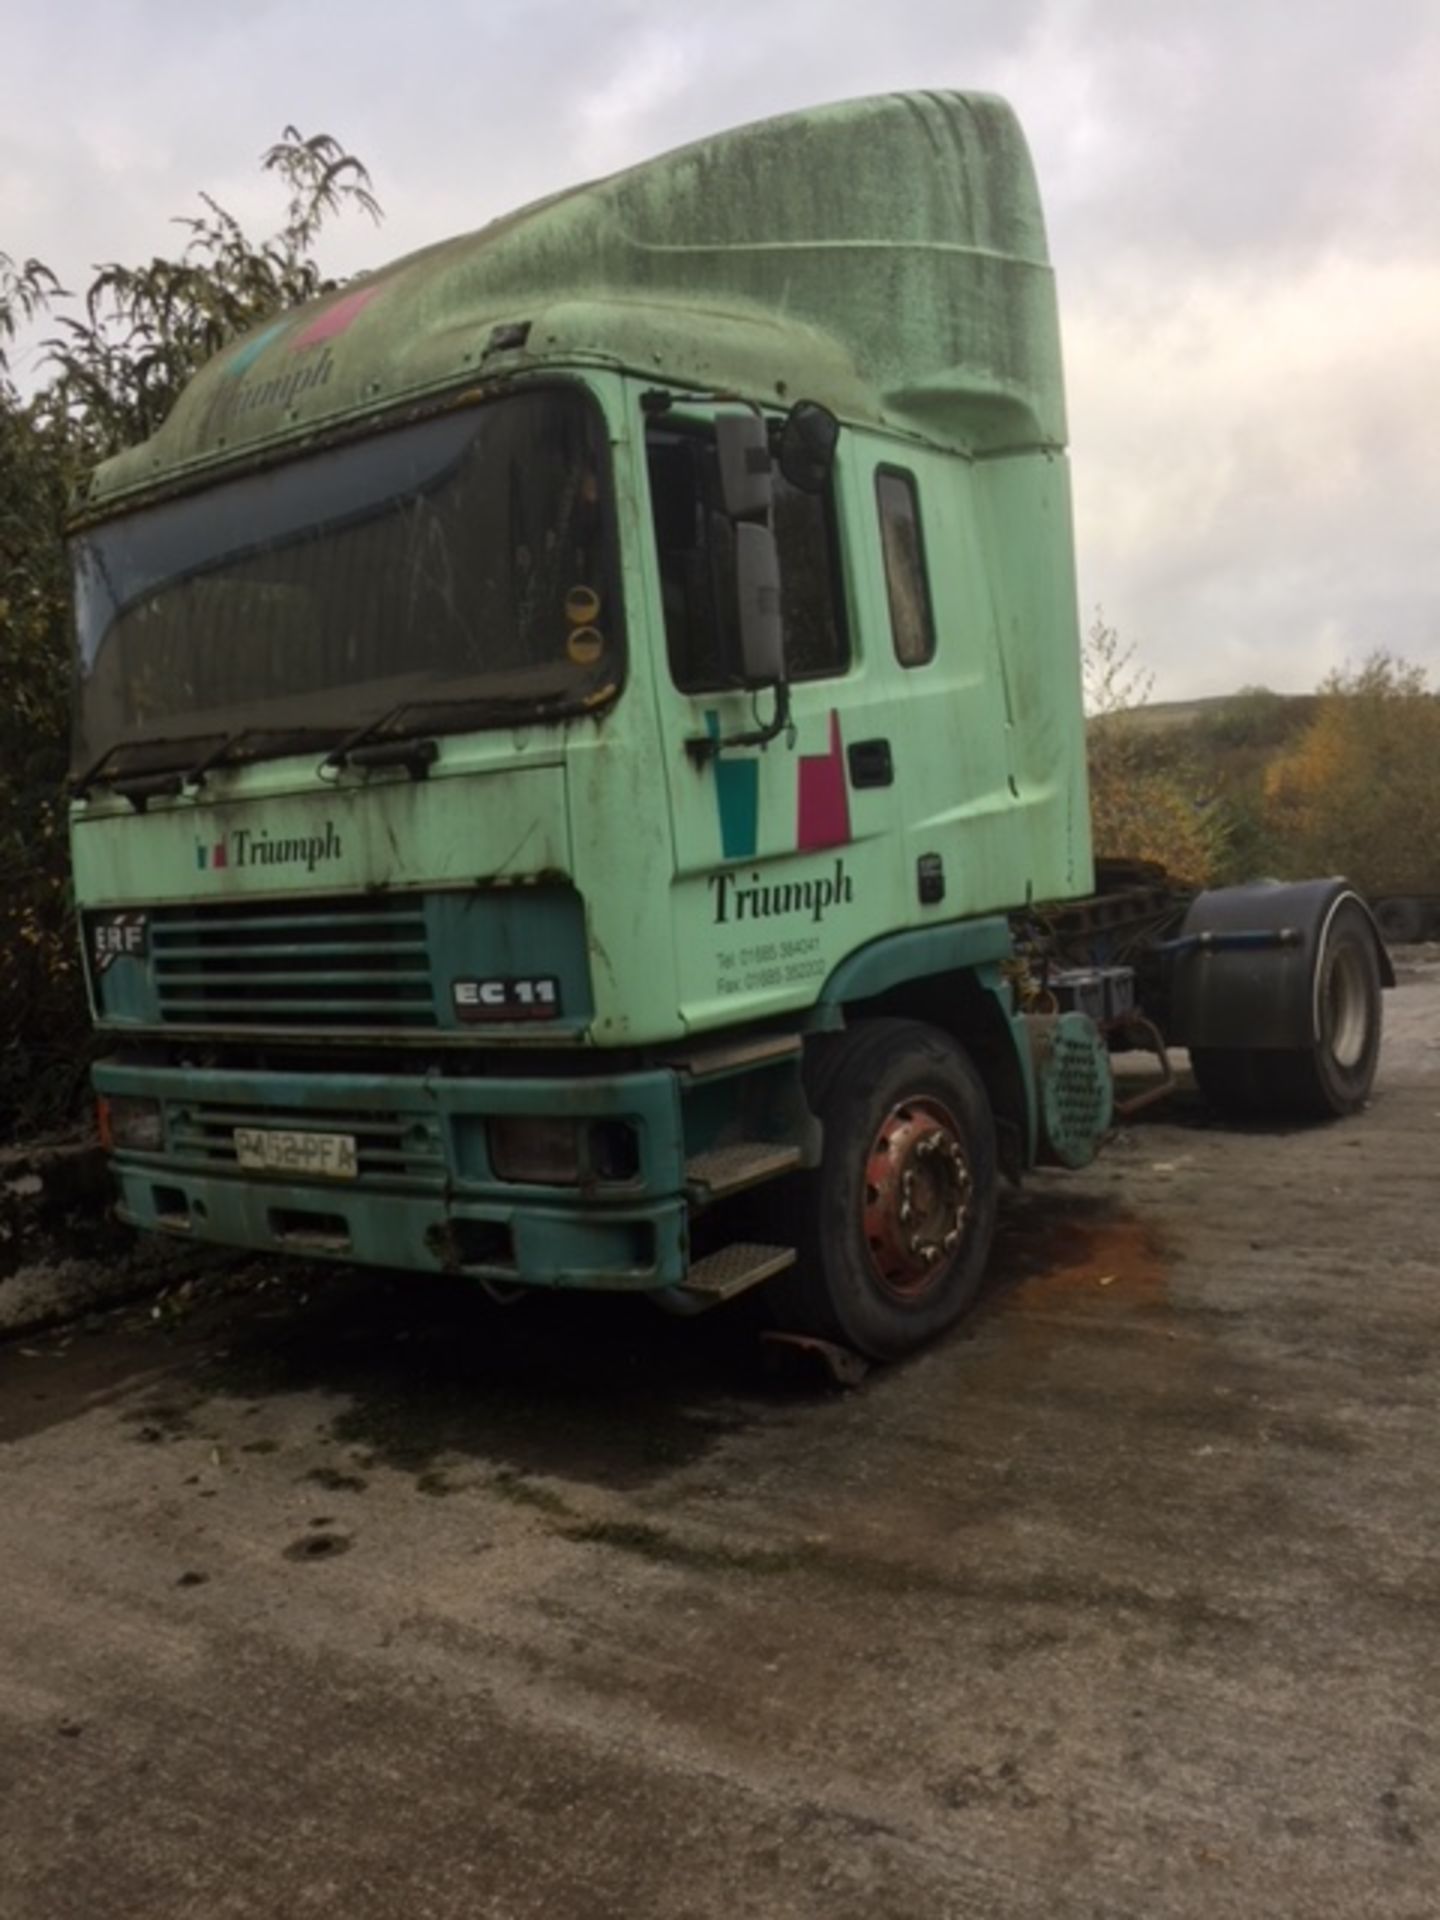 ERF EC11 Celect tractor unit with sleeper cab, Registration No. P452 PFA (sold as parts-no keys or